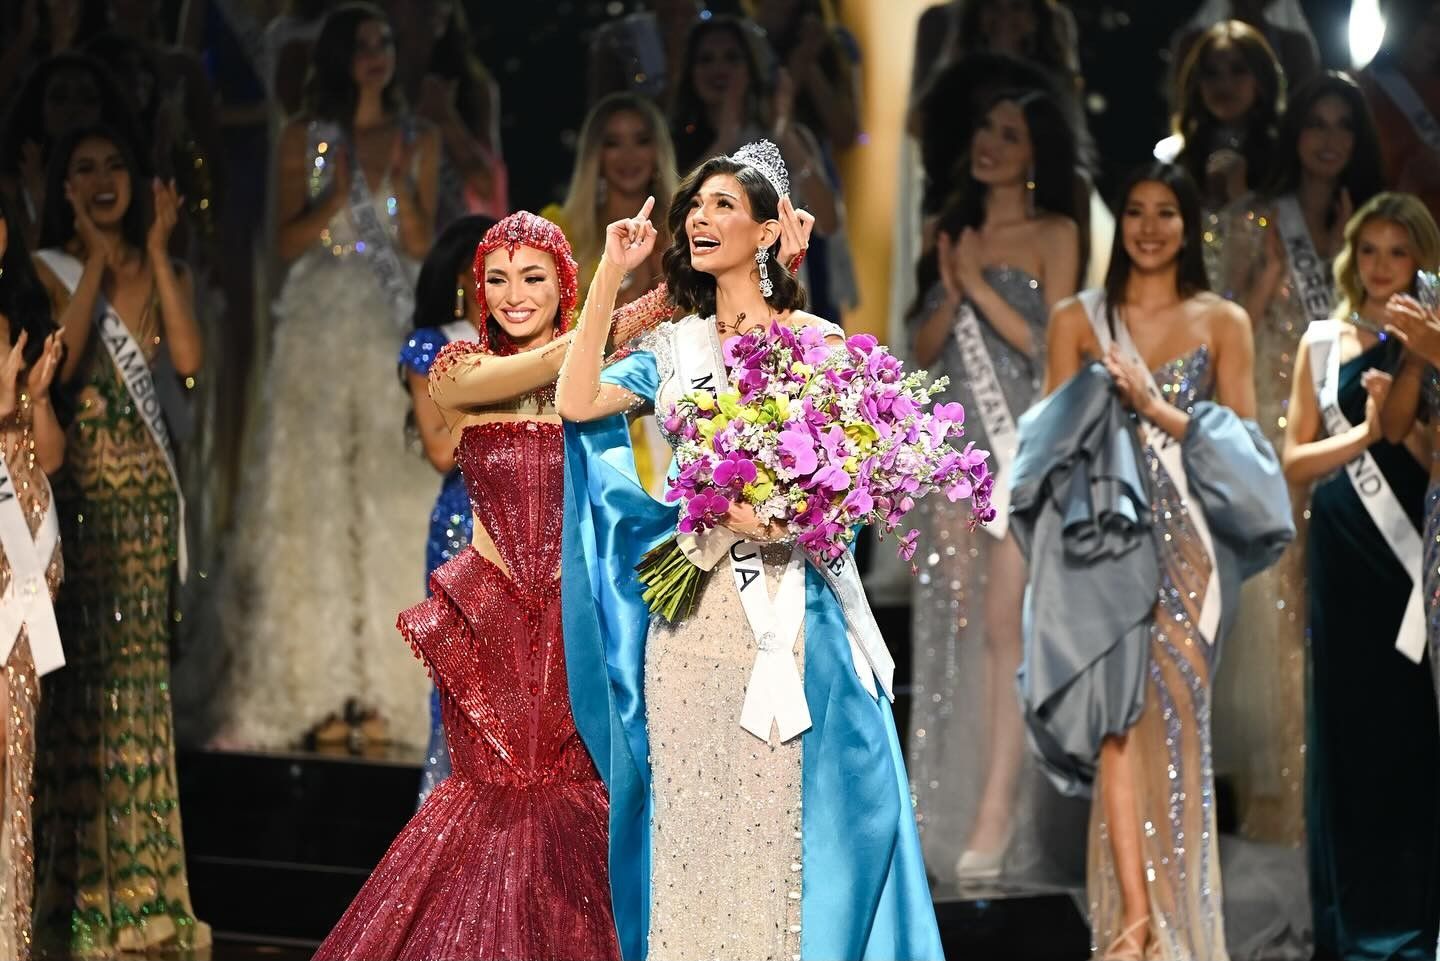 Sheynnis Palacios of Nicaragua wins Miss Universe 2023, first for her country